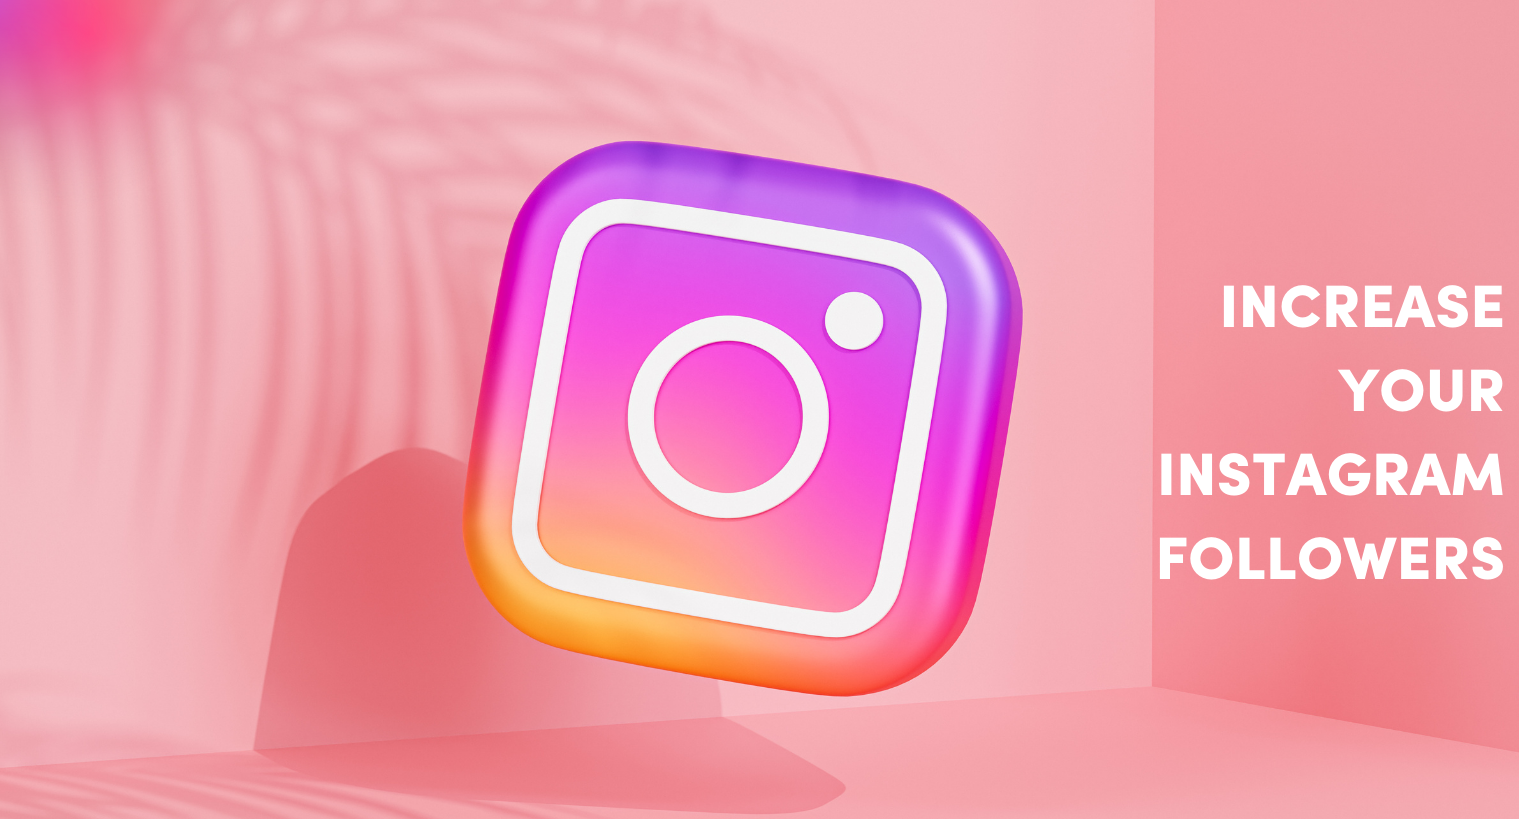 10 Tips to Increase Your Instagram Followers - Silverpush